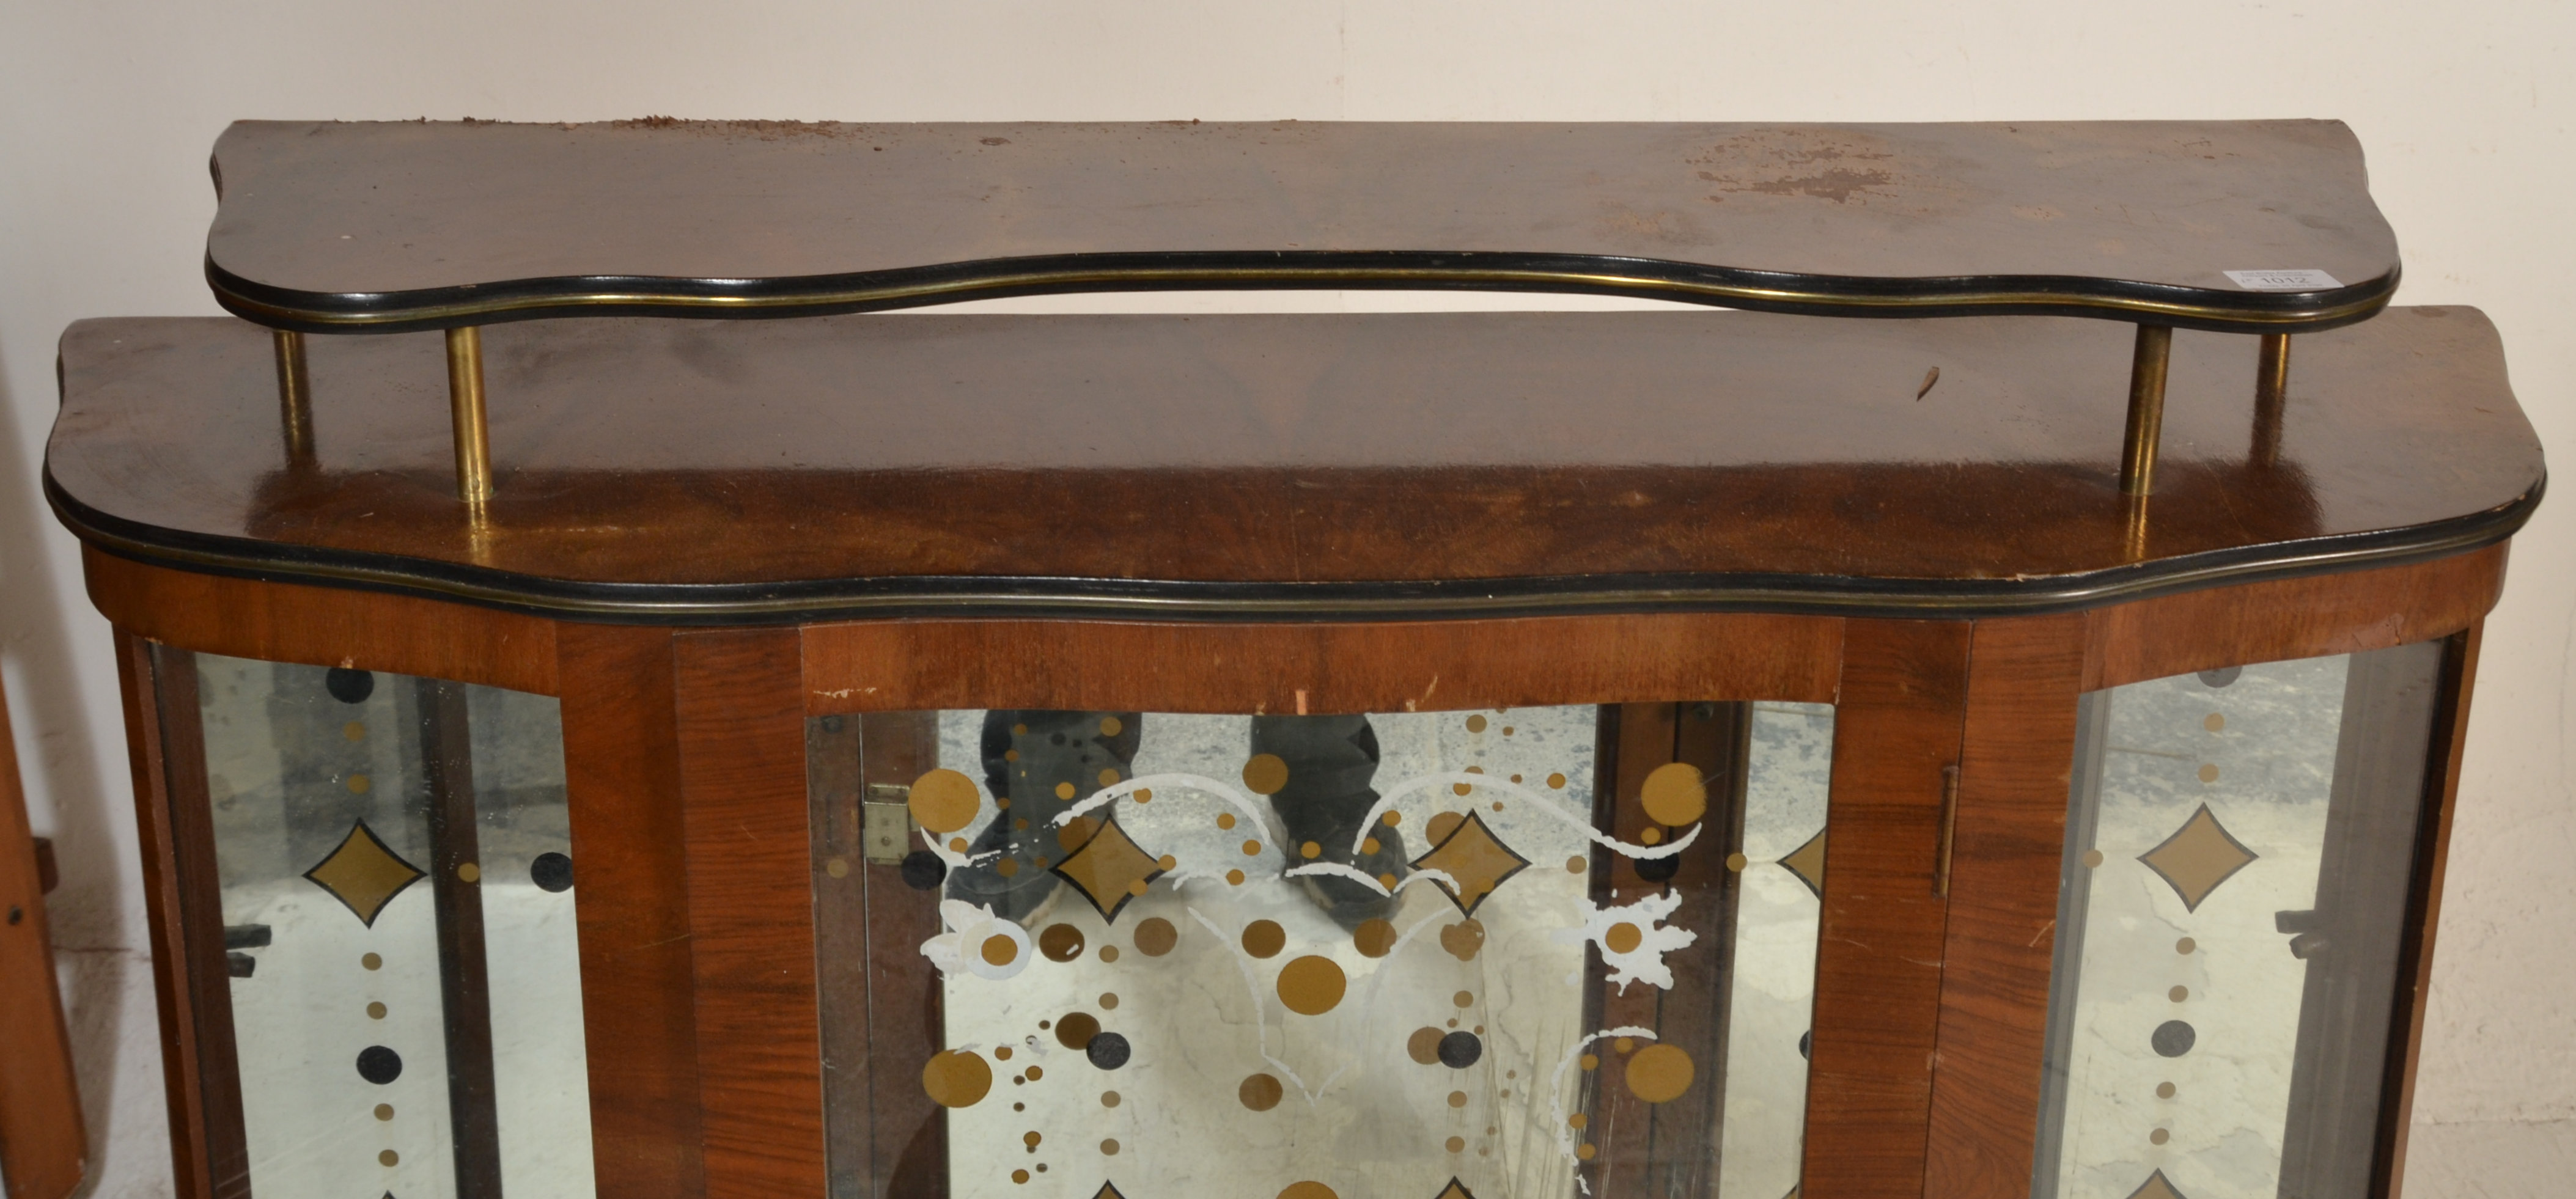 A 1930's Art Deco display cabinet with mirror back - Image 5 of 16